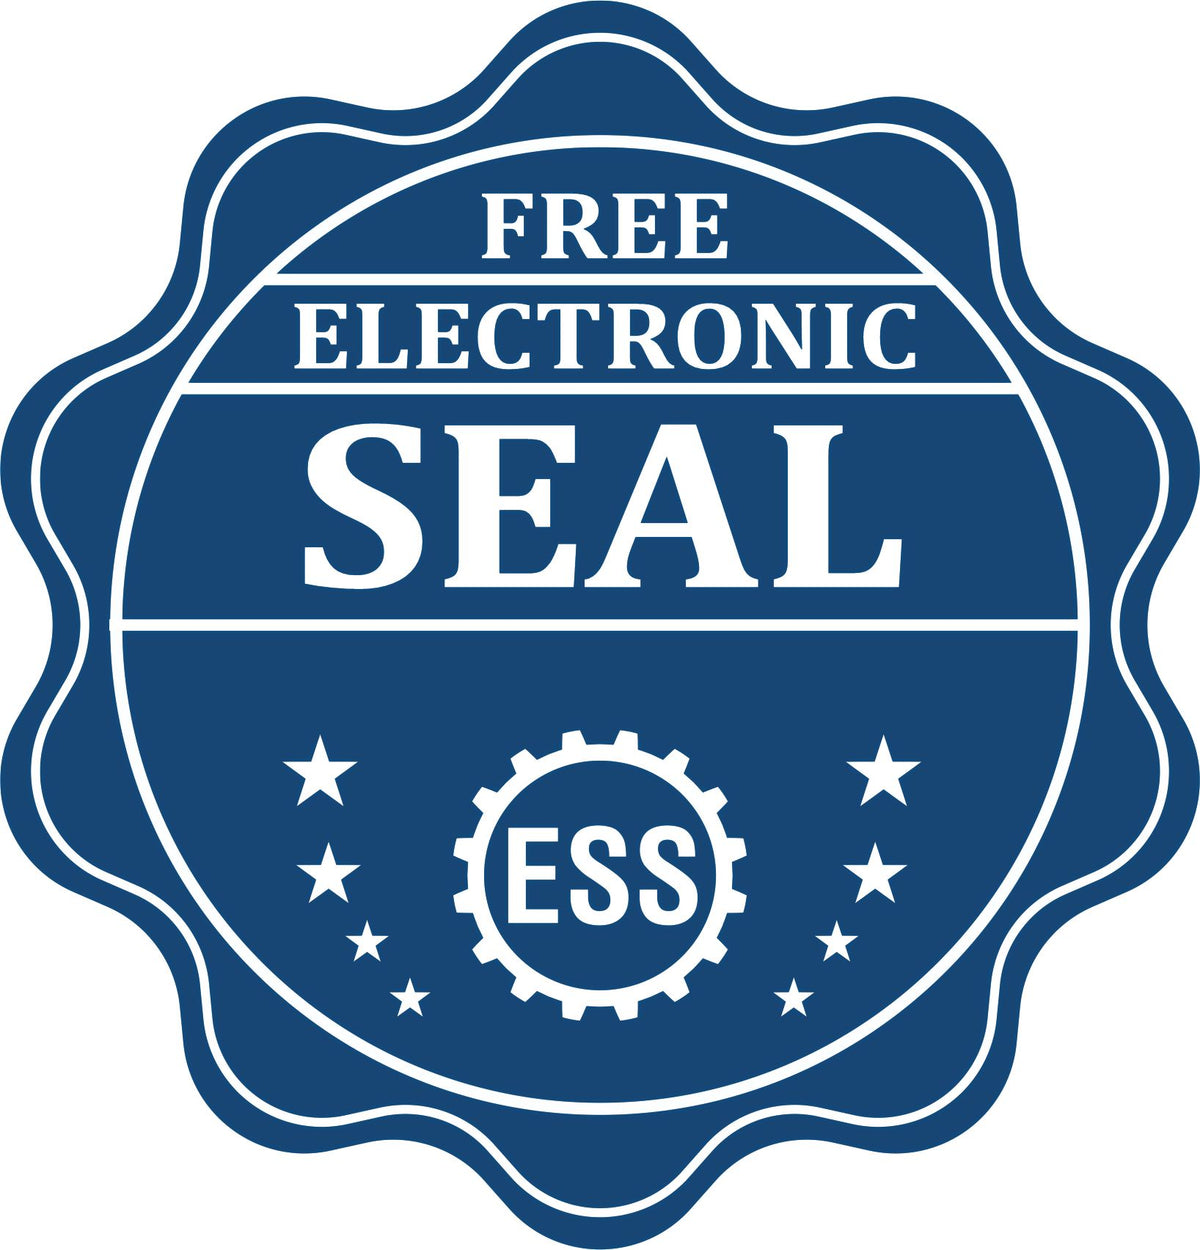 A badge showing a free electronic seal for the Gift Alaska Landscape Architect Seal with stars and the ESS gear on the emblem.